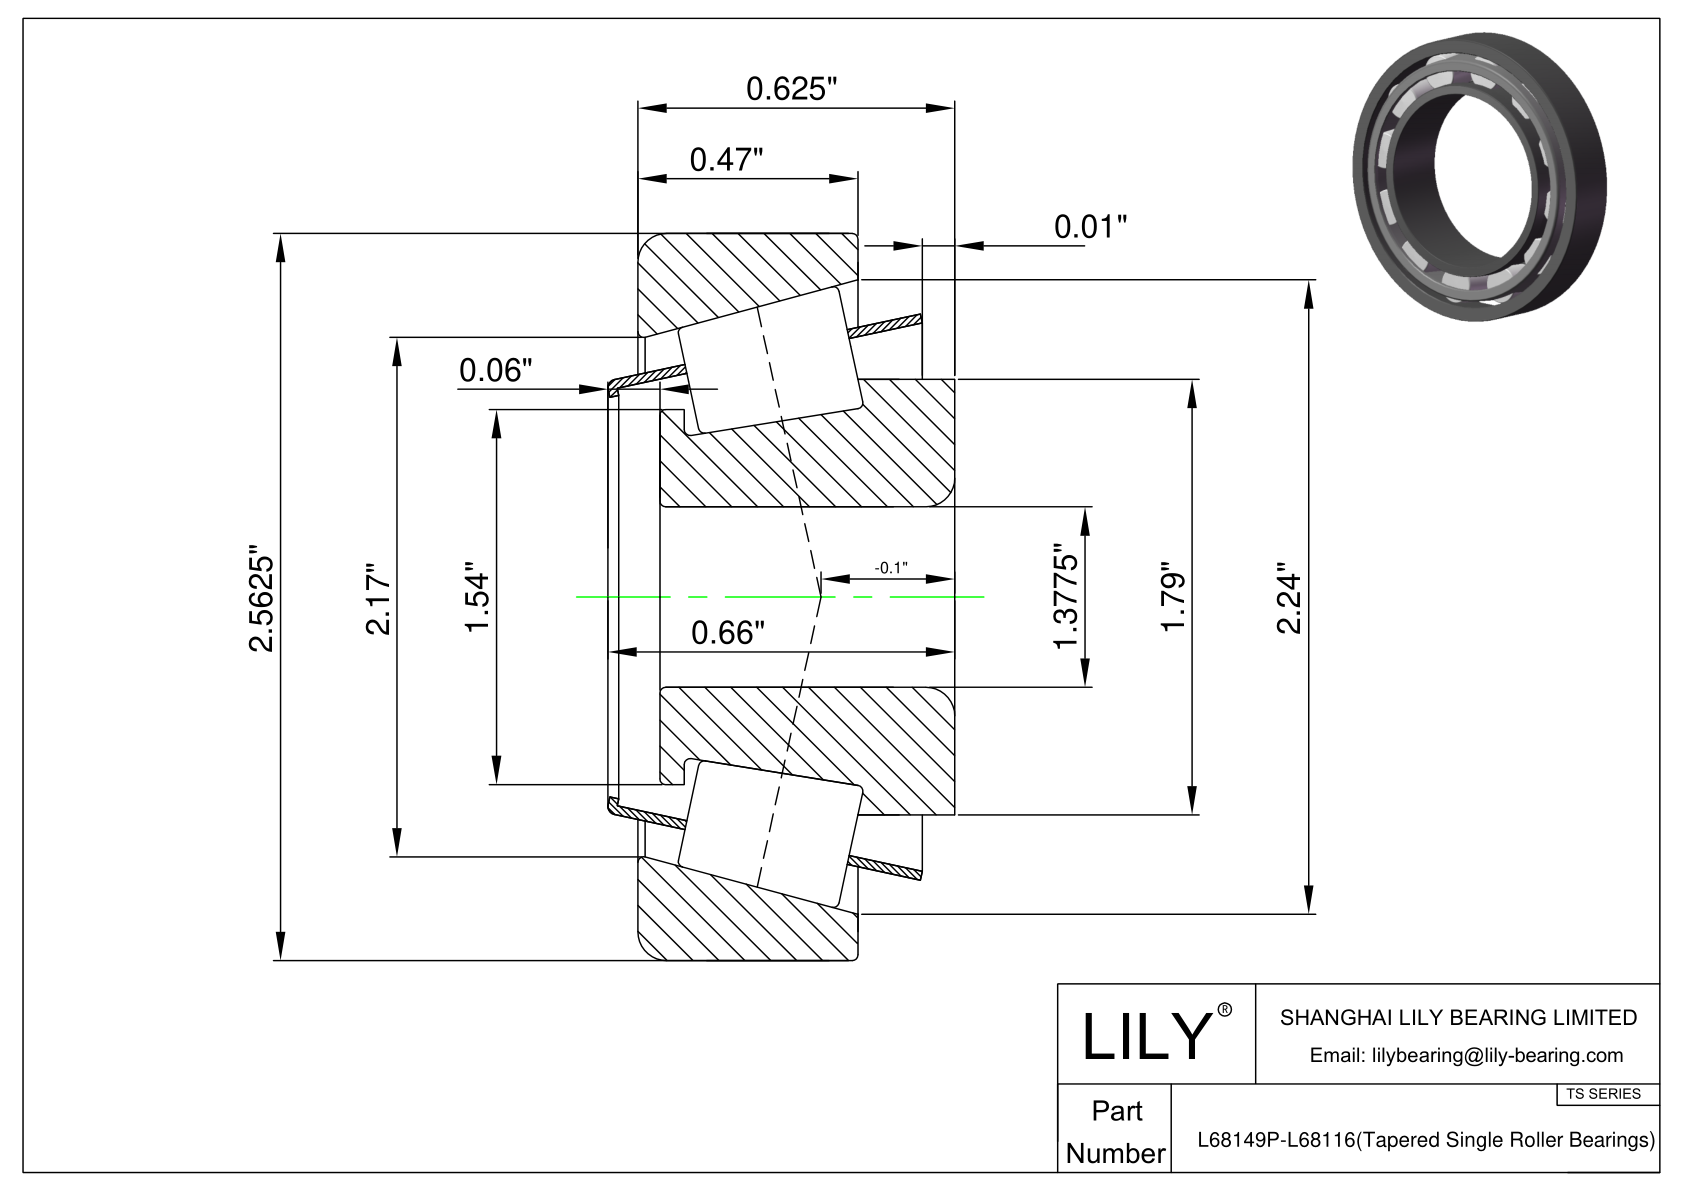 L68149P-L68116 TS (Tapered Single Roller Bearings) (Imperial) cad drawing